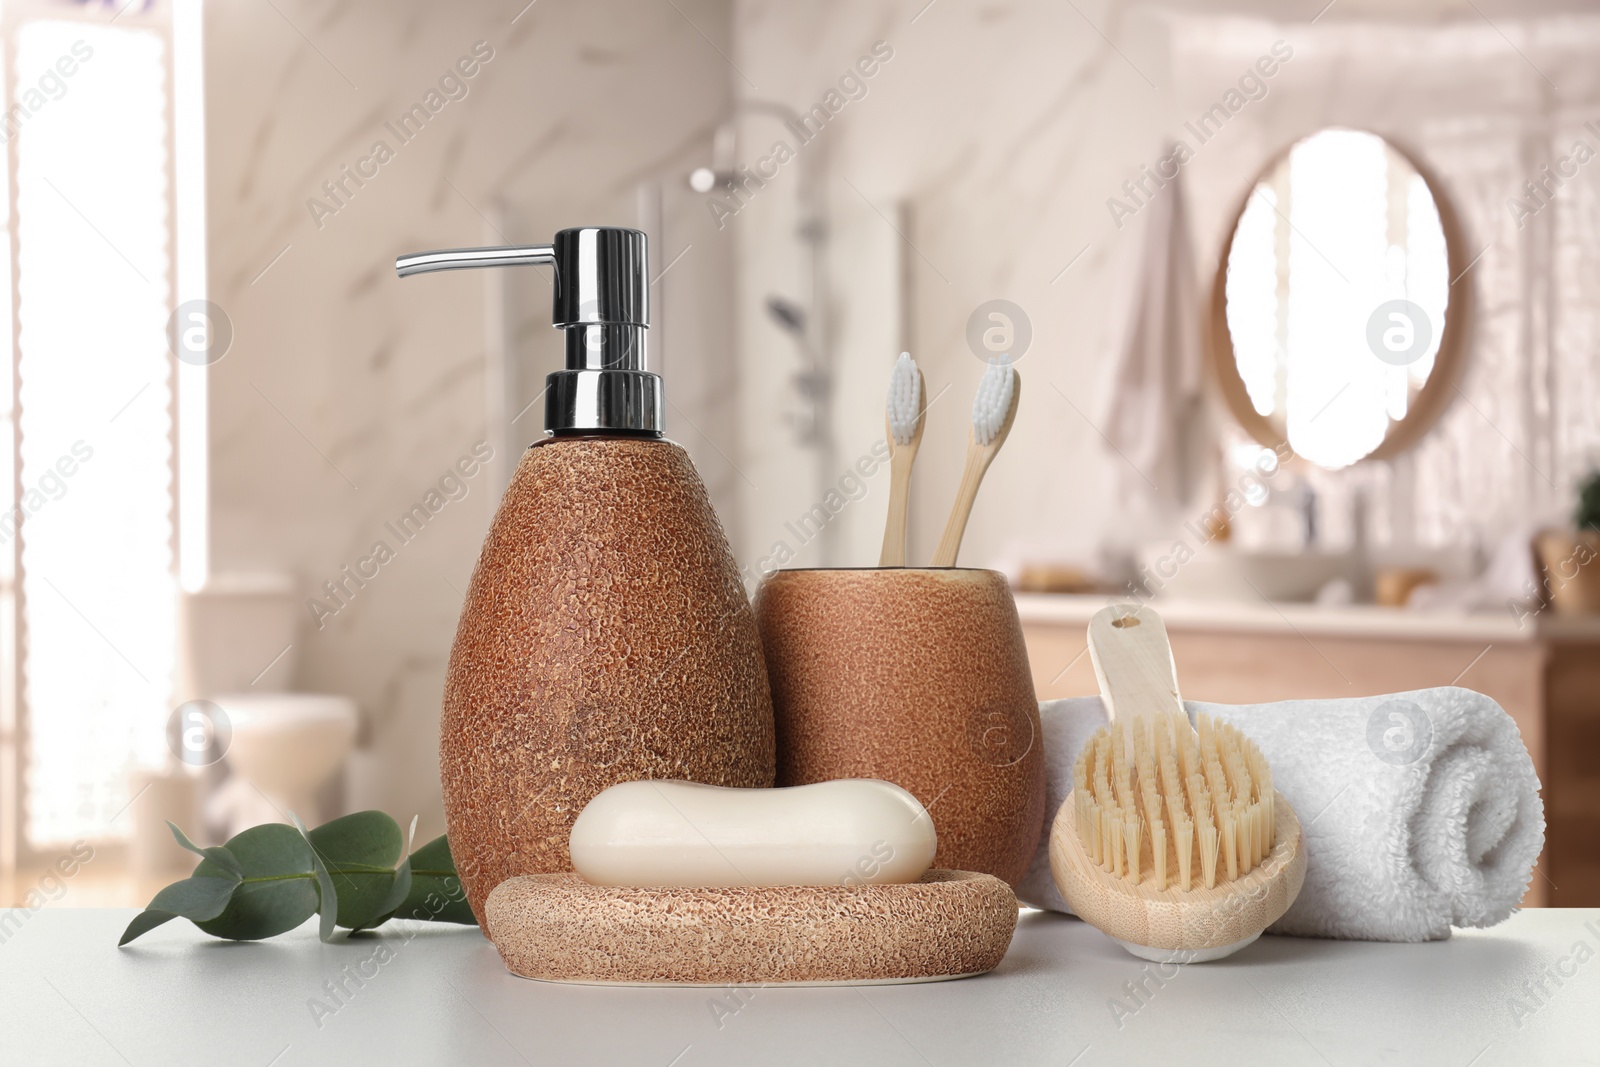 Image of Bath accessories. Different personal care products and eucalyptus leaves on white table in bathroom